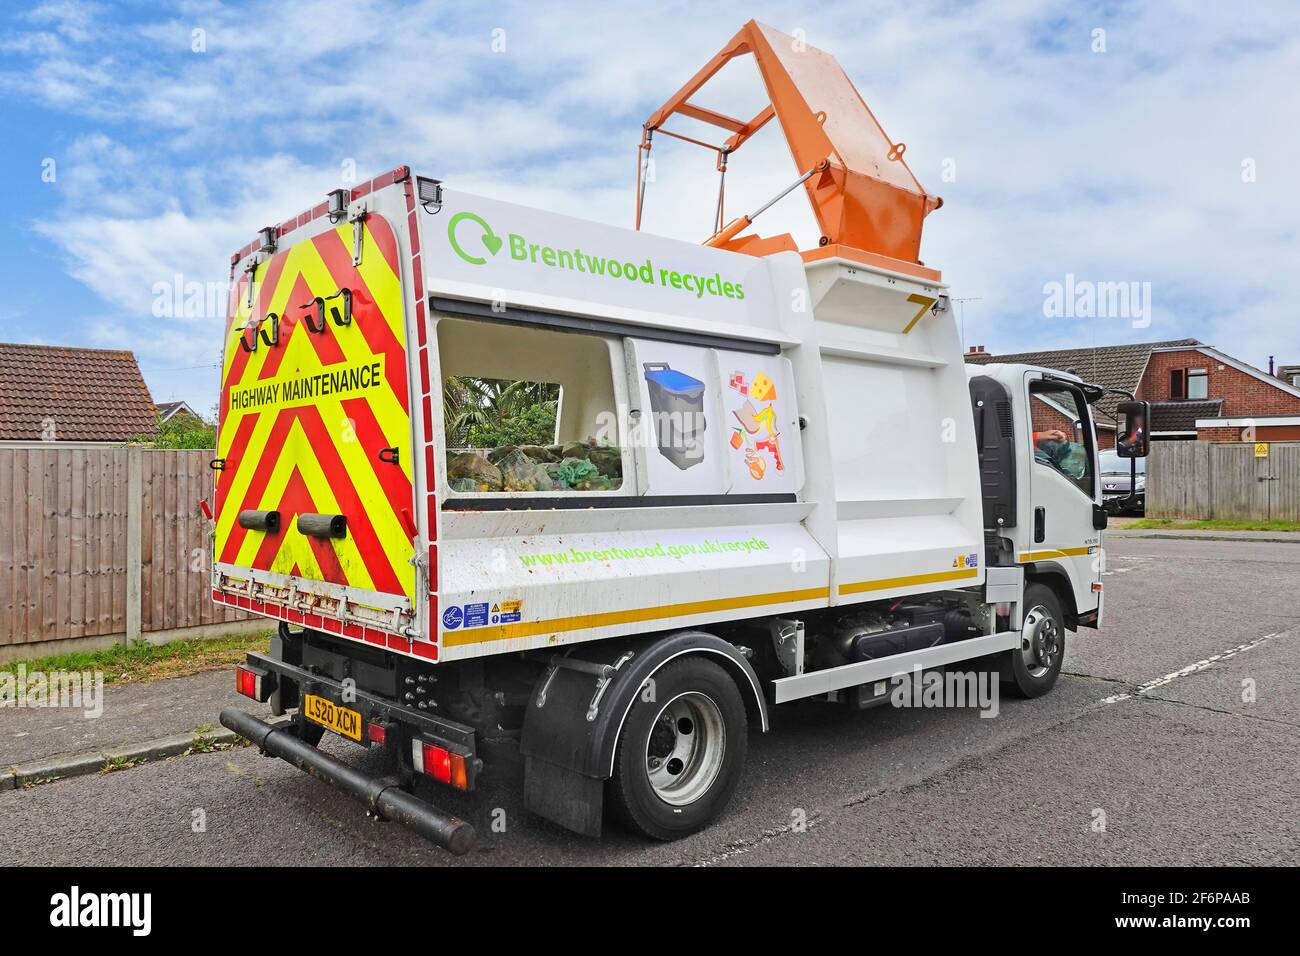 Brentwood Council recycling food waste management & collection dustcart lorry truck with hydraulic lift for recycle wheelie bin caddy bag emptying UK Stock Photo